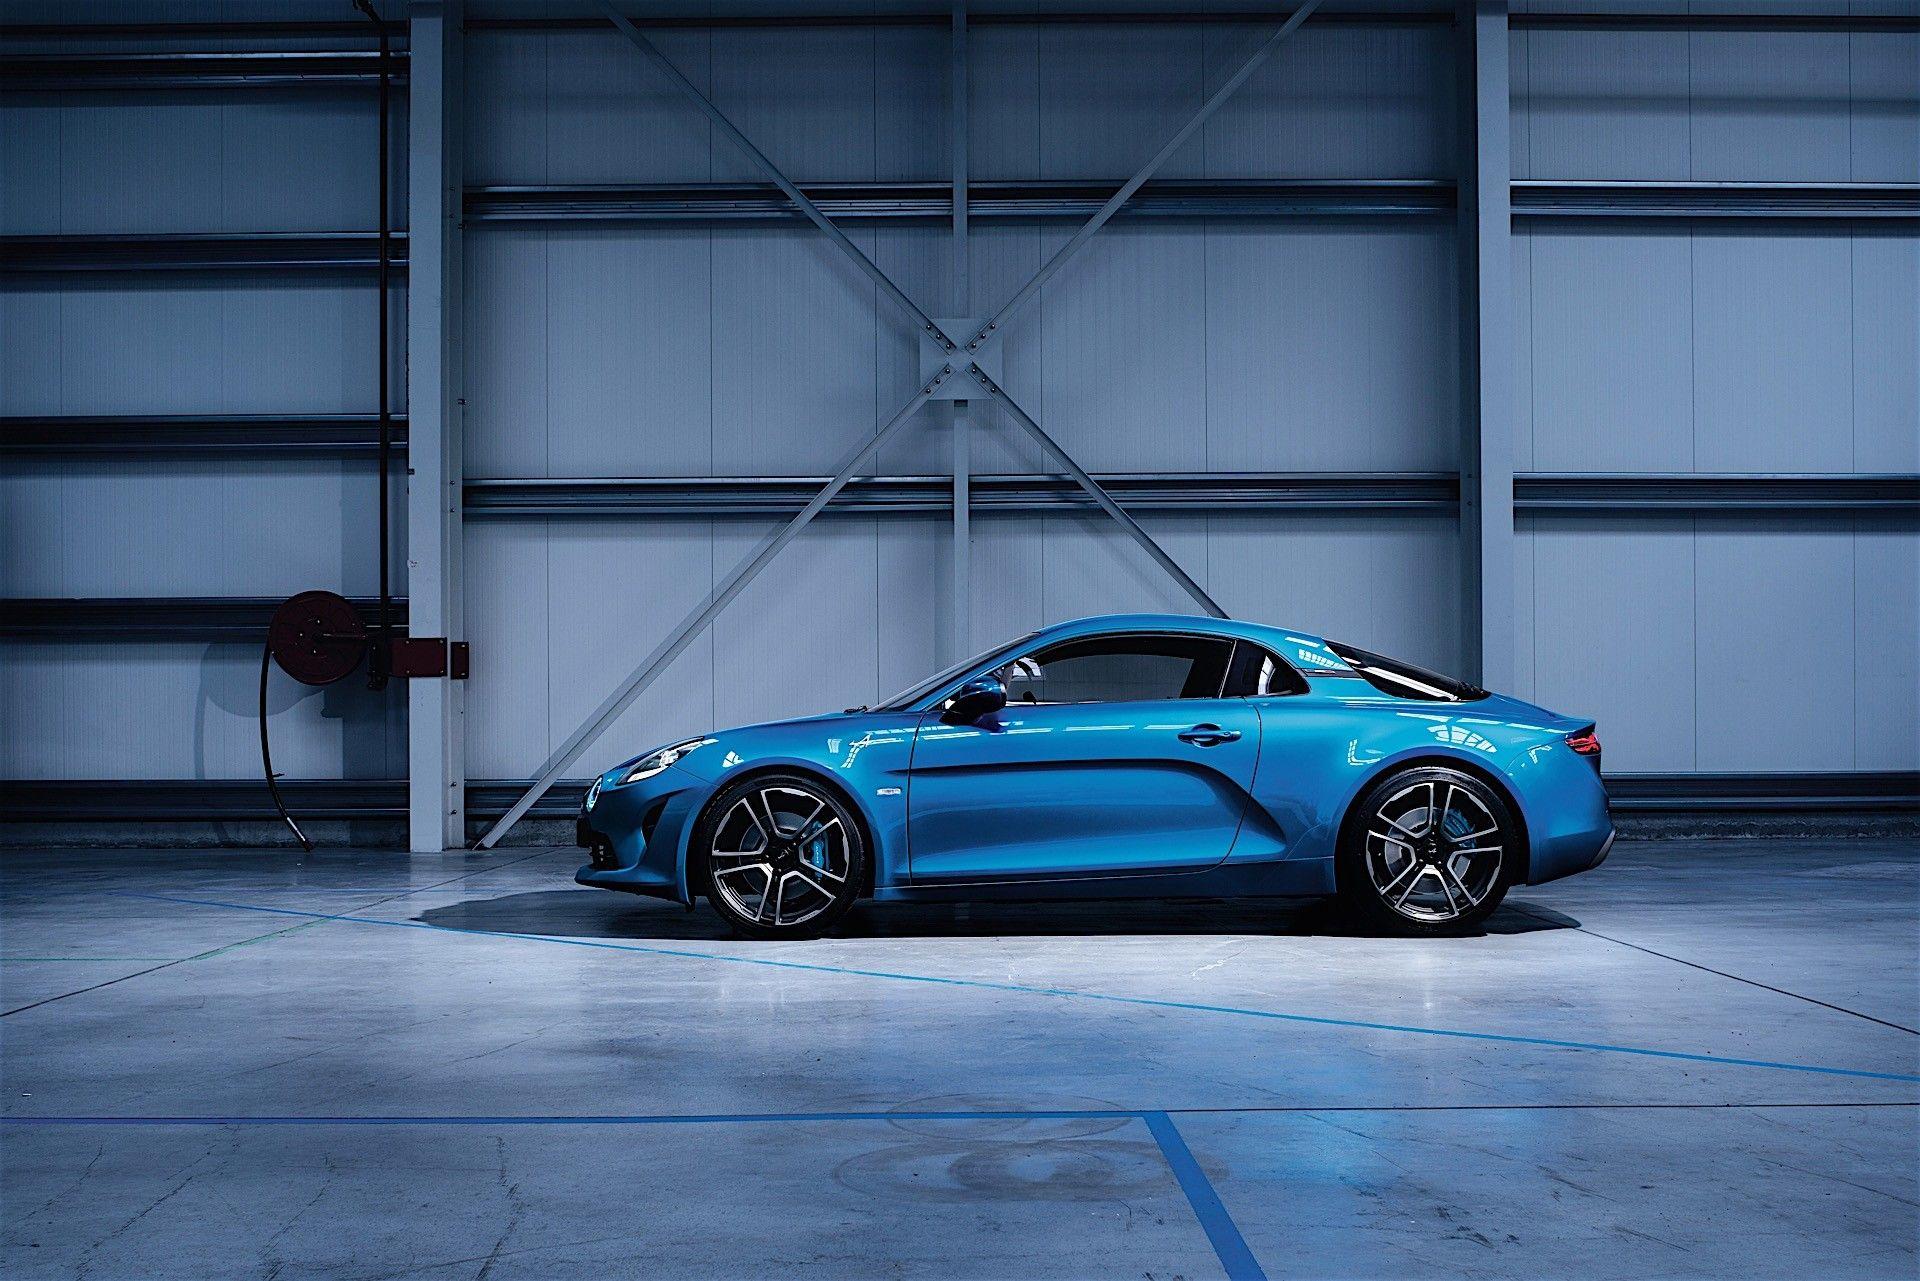 Alpine Publishes First Image of New Production Car, This Is